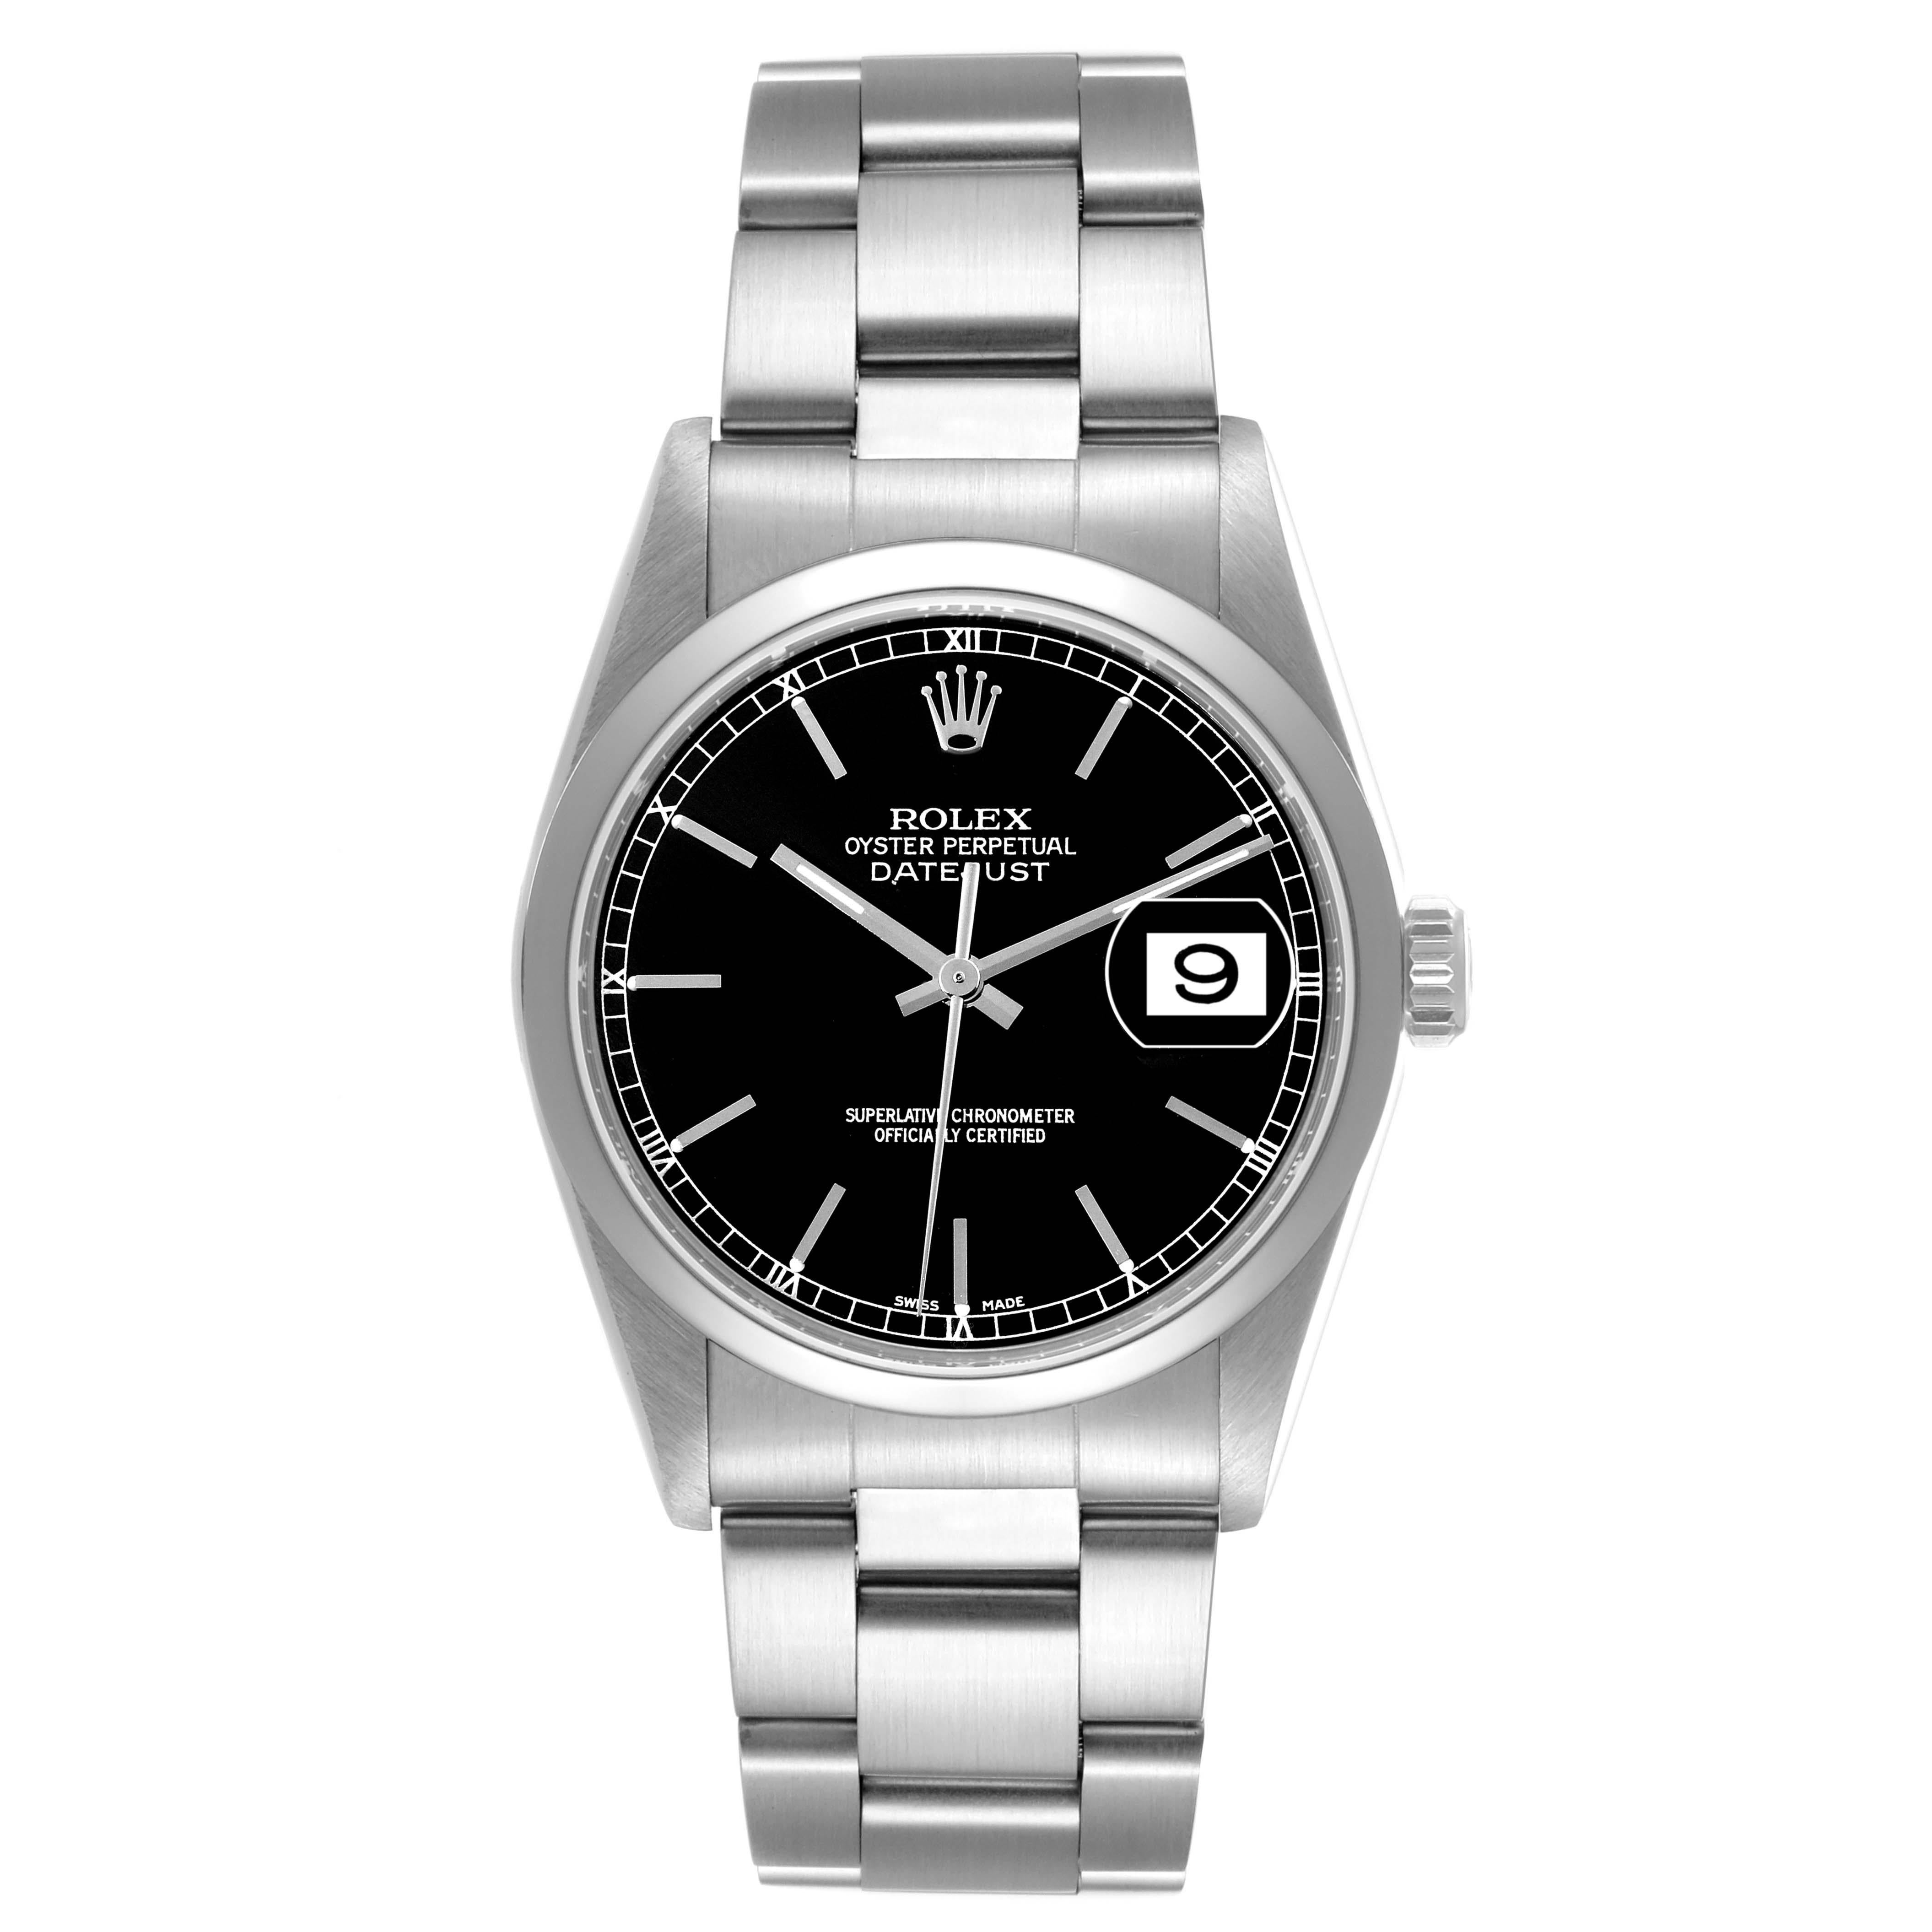 Rolex Datejust 36mm Black Dial Smooth Bezel Steel Mens Watch 16200. Officially certified chronometer automatic self-winding movement with quickset date function. Stainless steel oyster case 36mm in diameter. Rolex logo on the crown. Stainless steel